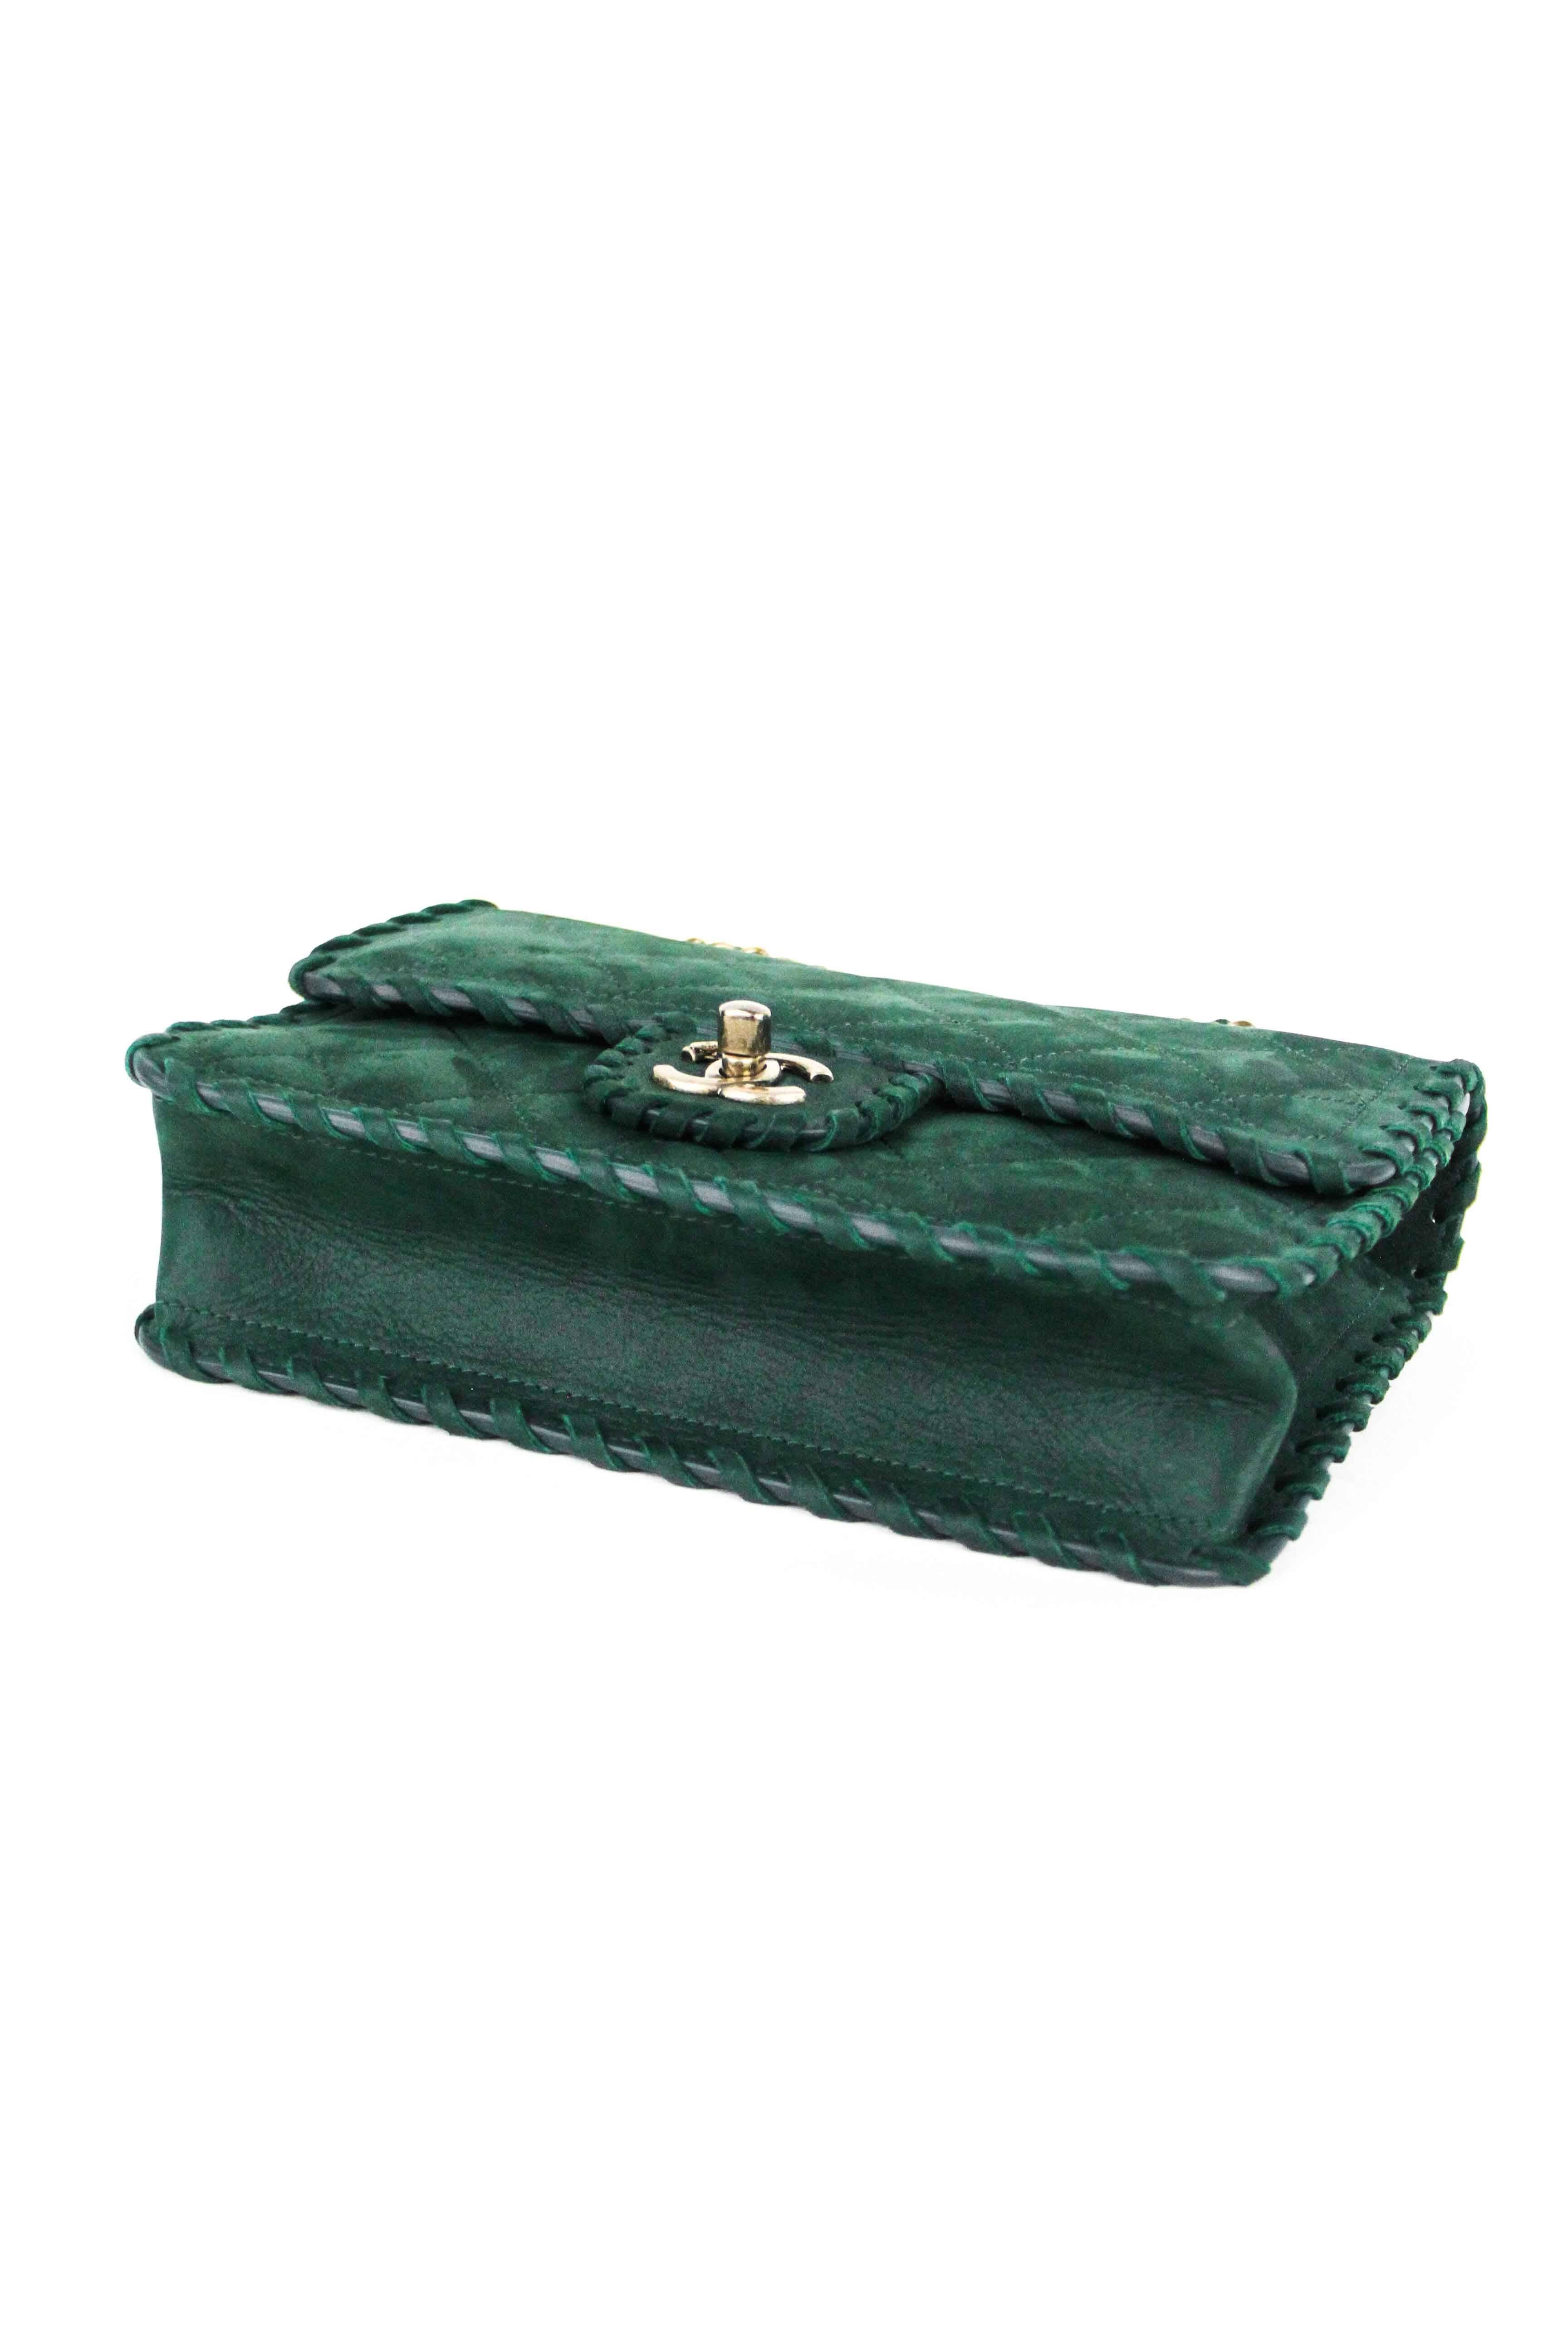 Offered is a new pre-owned item from Chanel, a striking kelly green suede flap with gold-tone hardware. Classic chain handle with beautiful details.  Whip stitch  monochrome trim on green quilted suede making this the ideal bag for fall.  Comes with